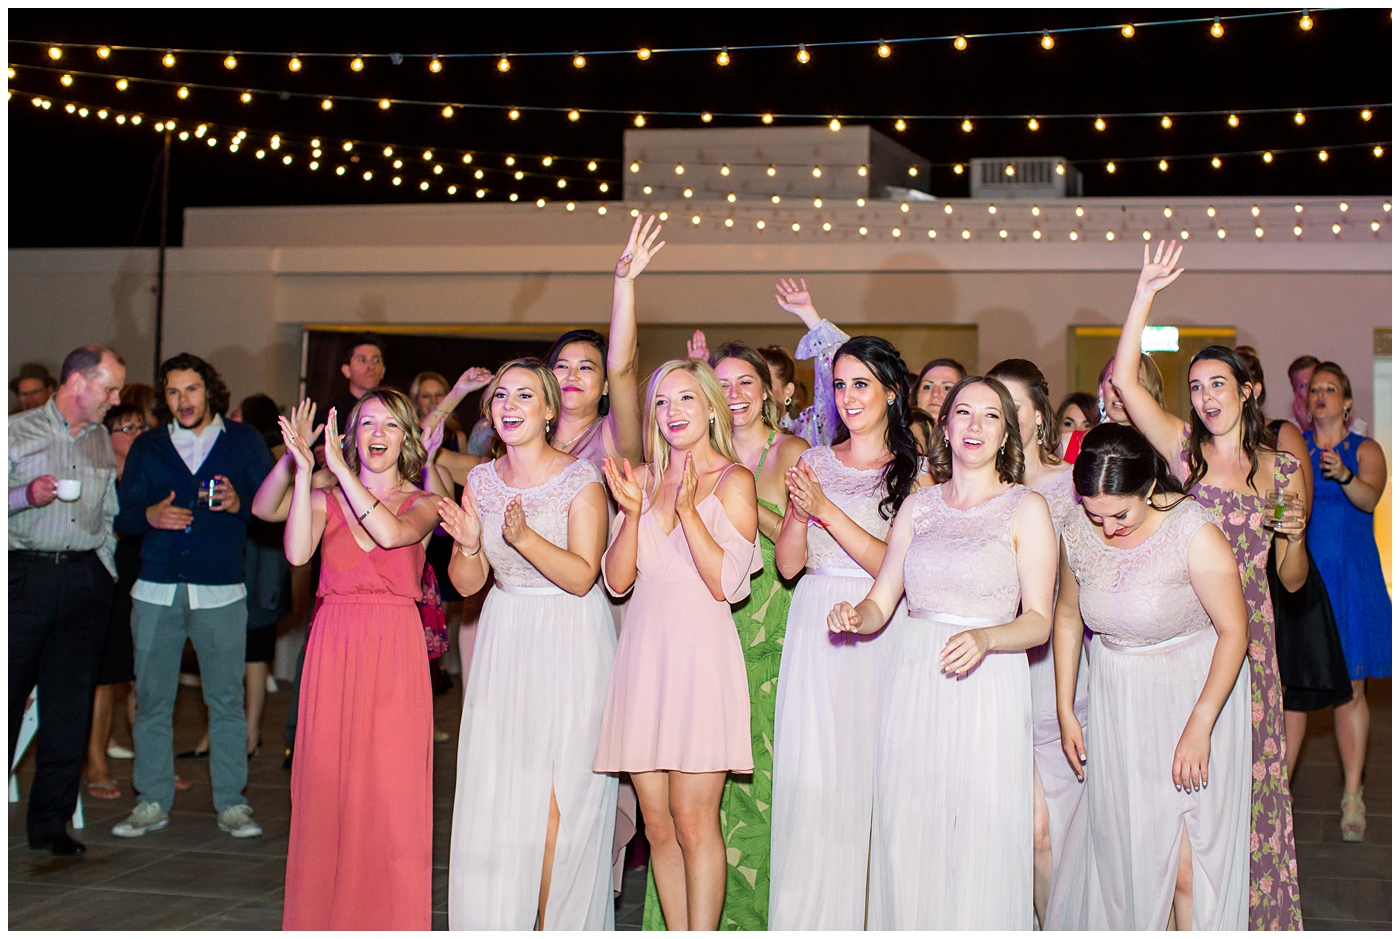 single ladies bouquet toss at rooftop wedding reception with twinkle lights